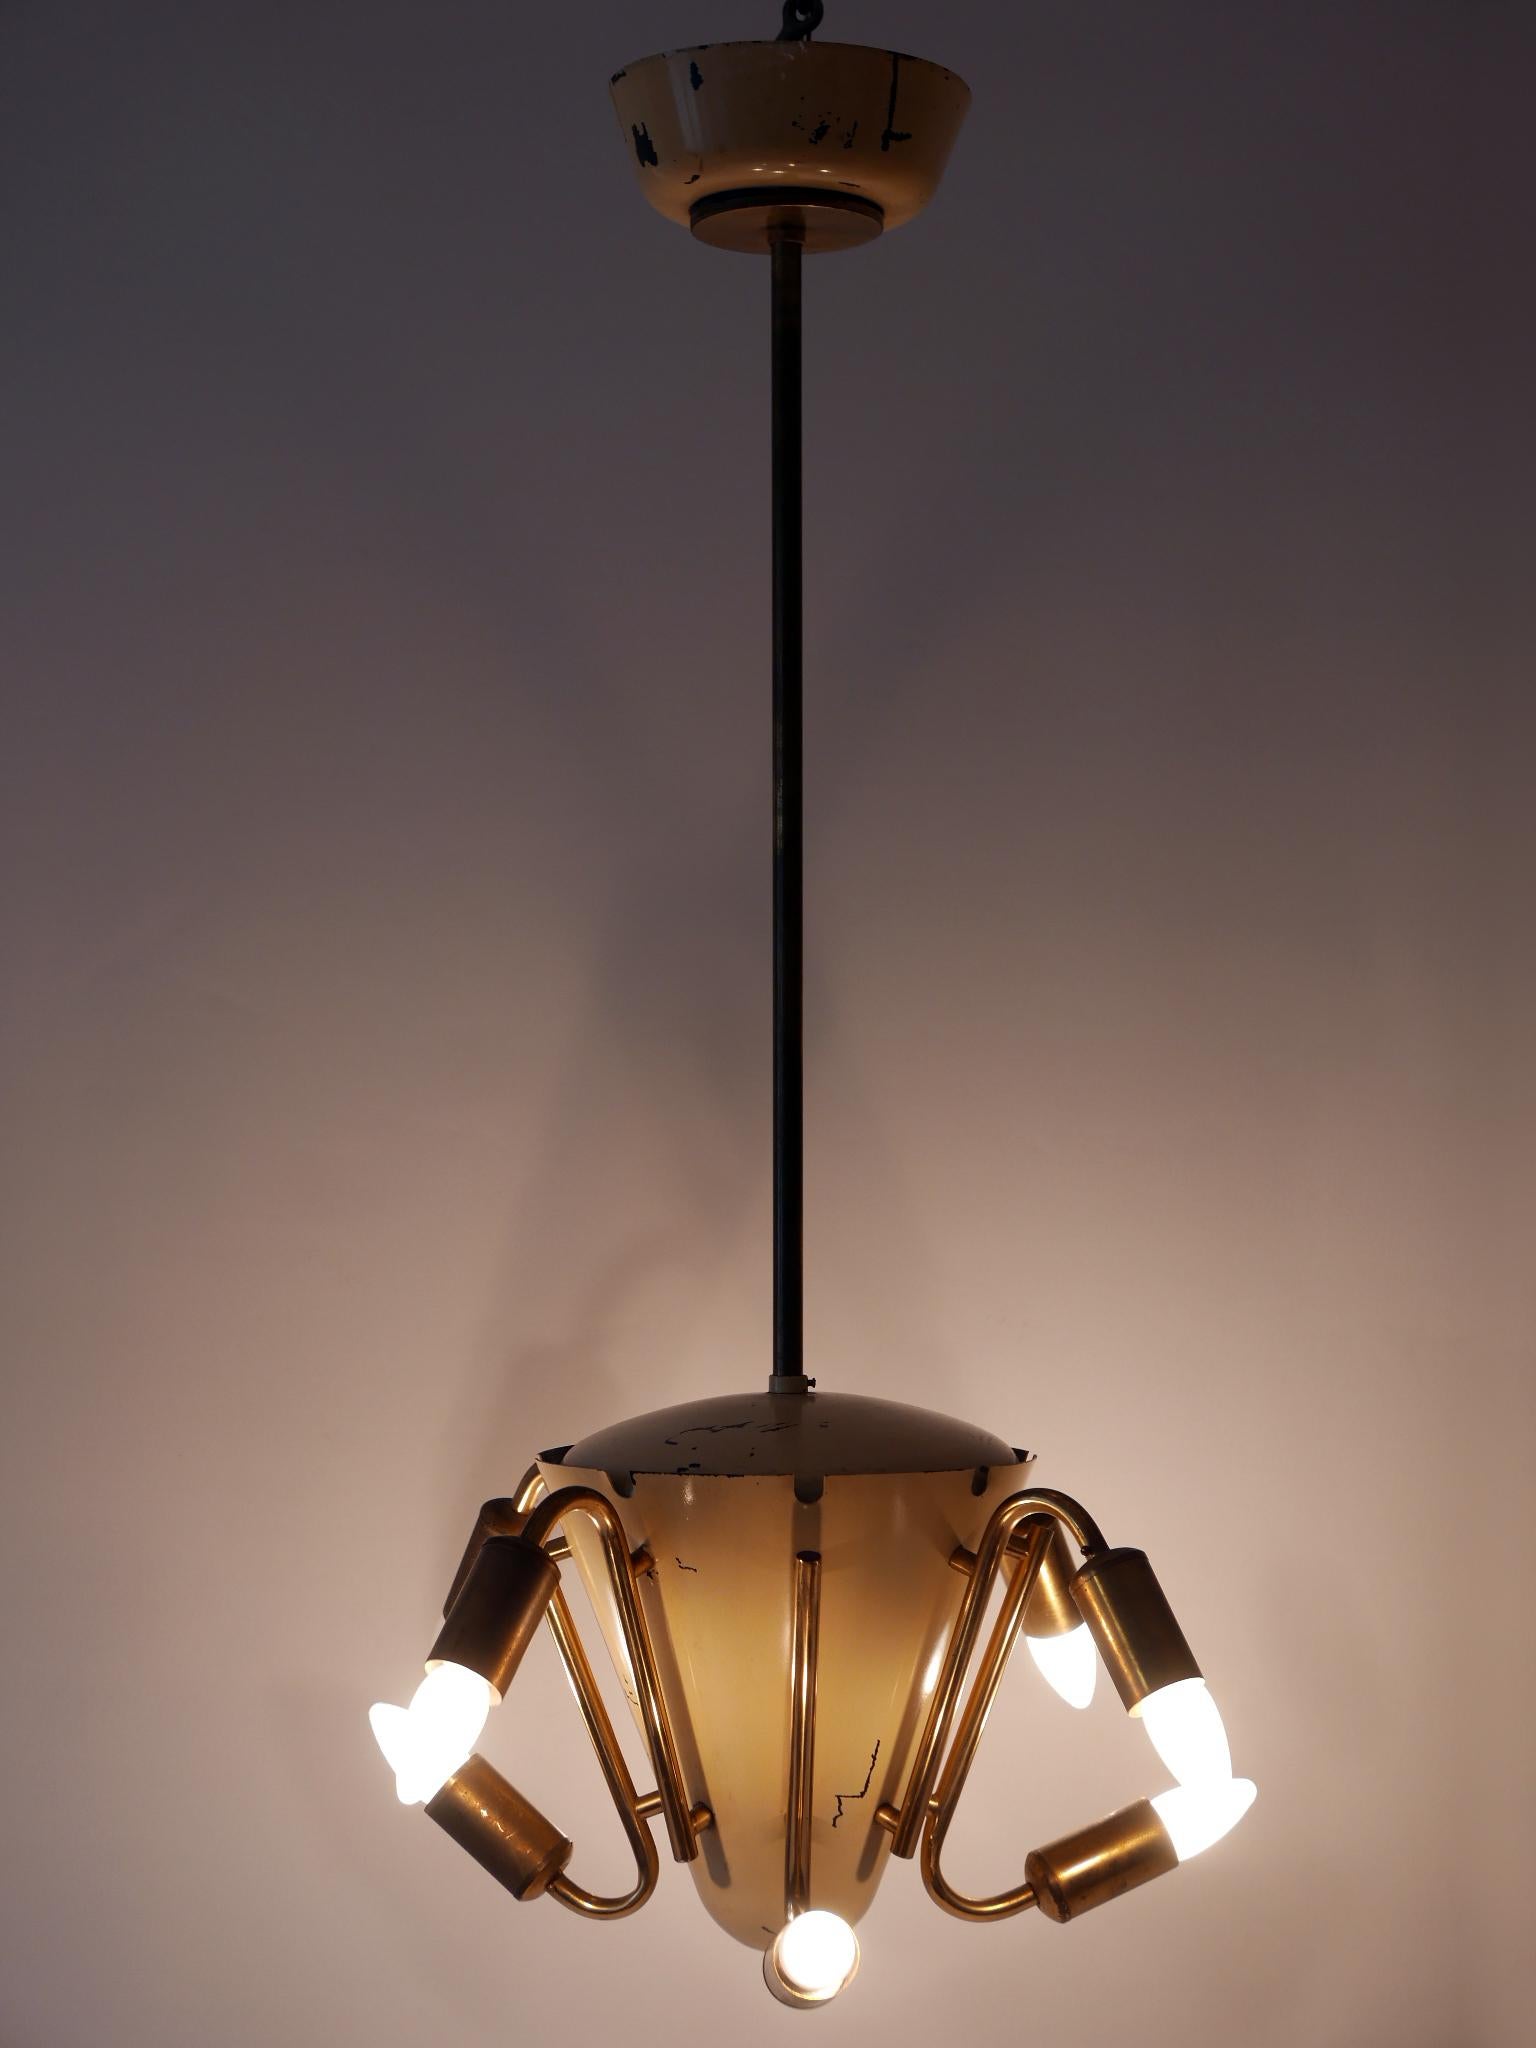 Exceptional eight-armed Mid-Century Modern Sputnik chandelier or pendant lamp. Designed and manufactured in 1950s, Germany. I think this is a modified piece from a fluorescent tube chandelier.

Executed in partly beige enameled brass, the